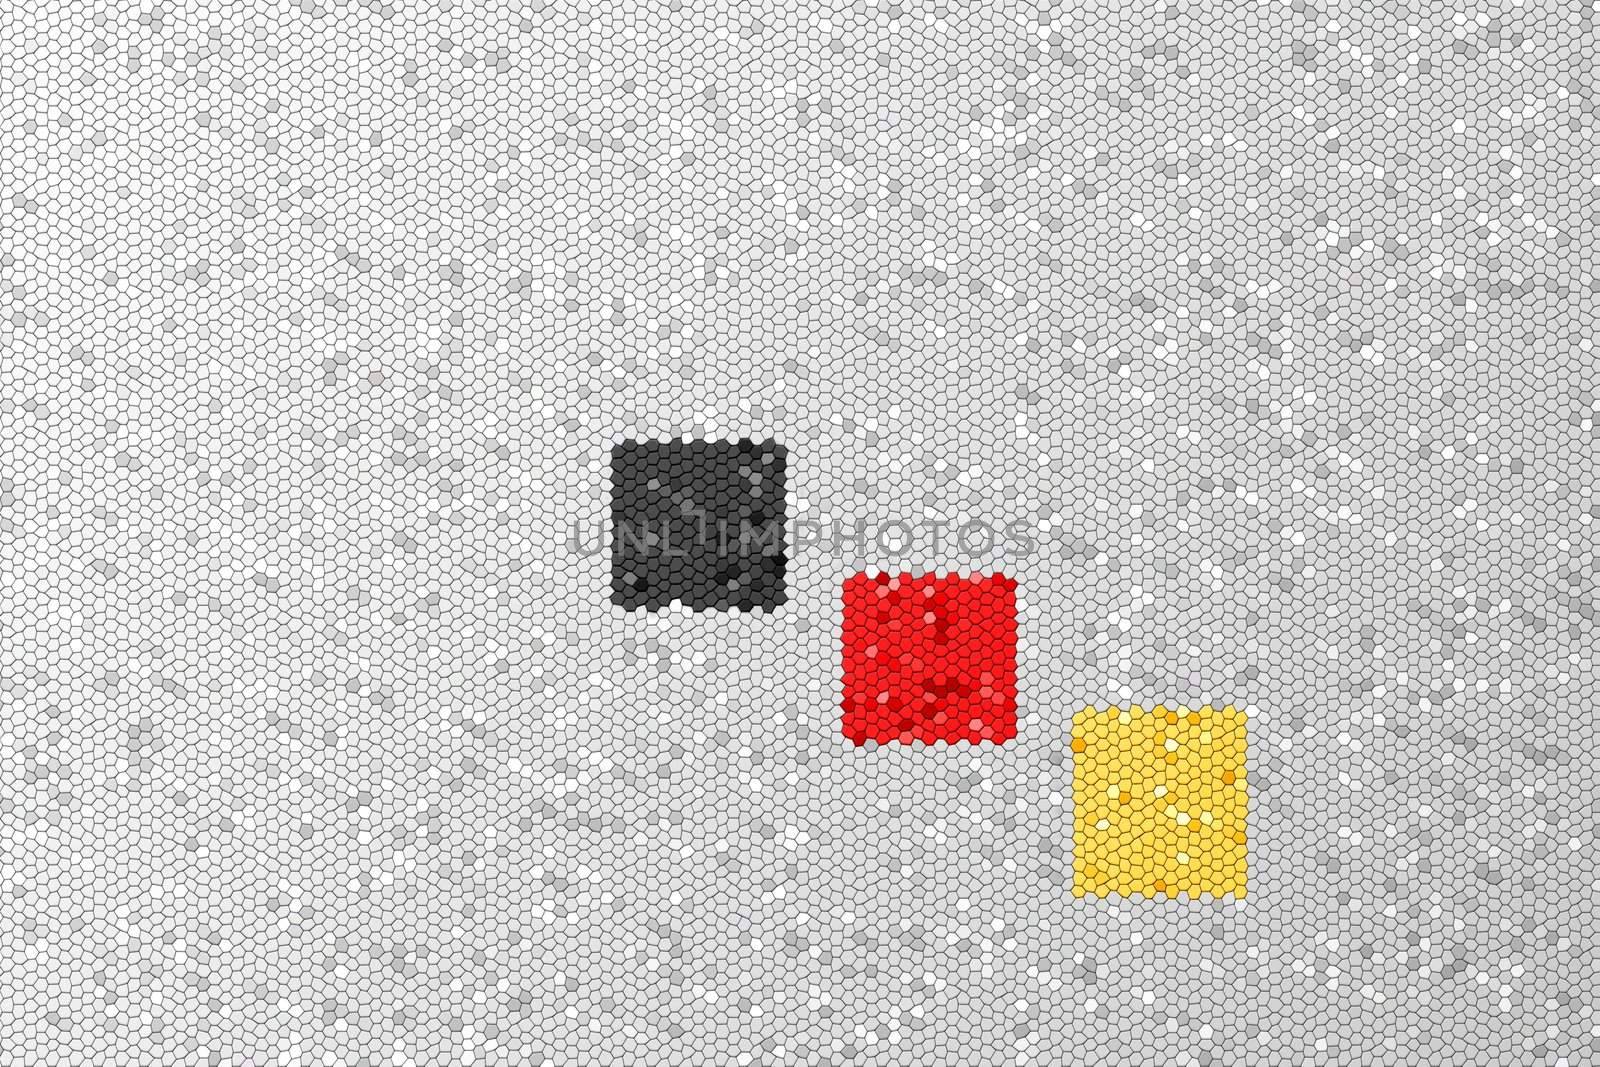 Color of the Germany, Belgium flag as a mosaic.